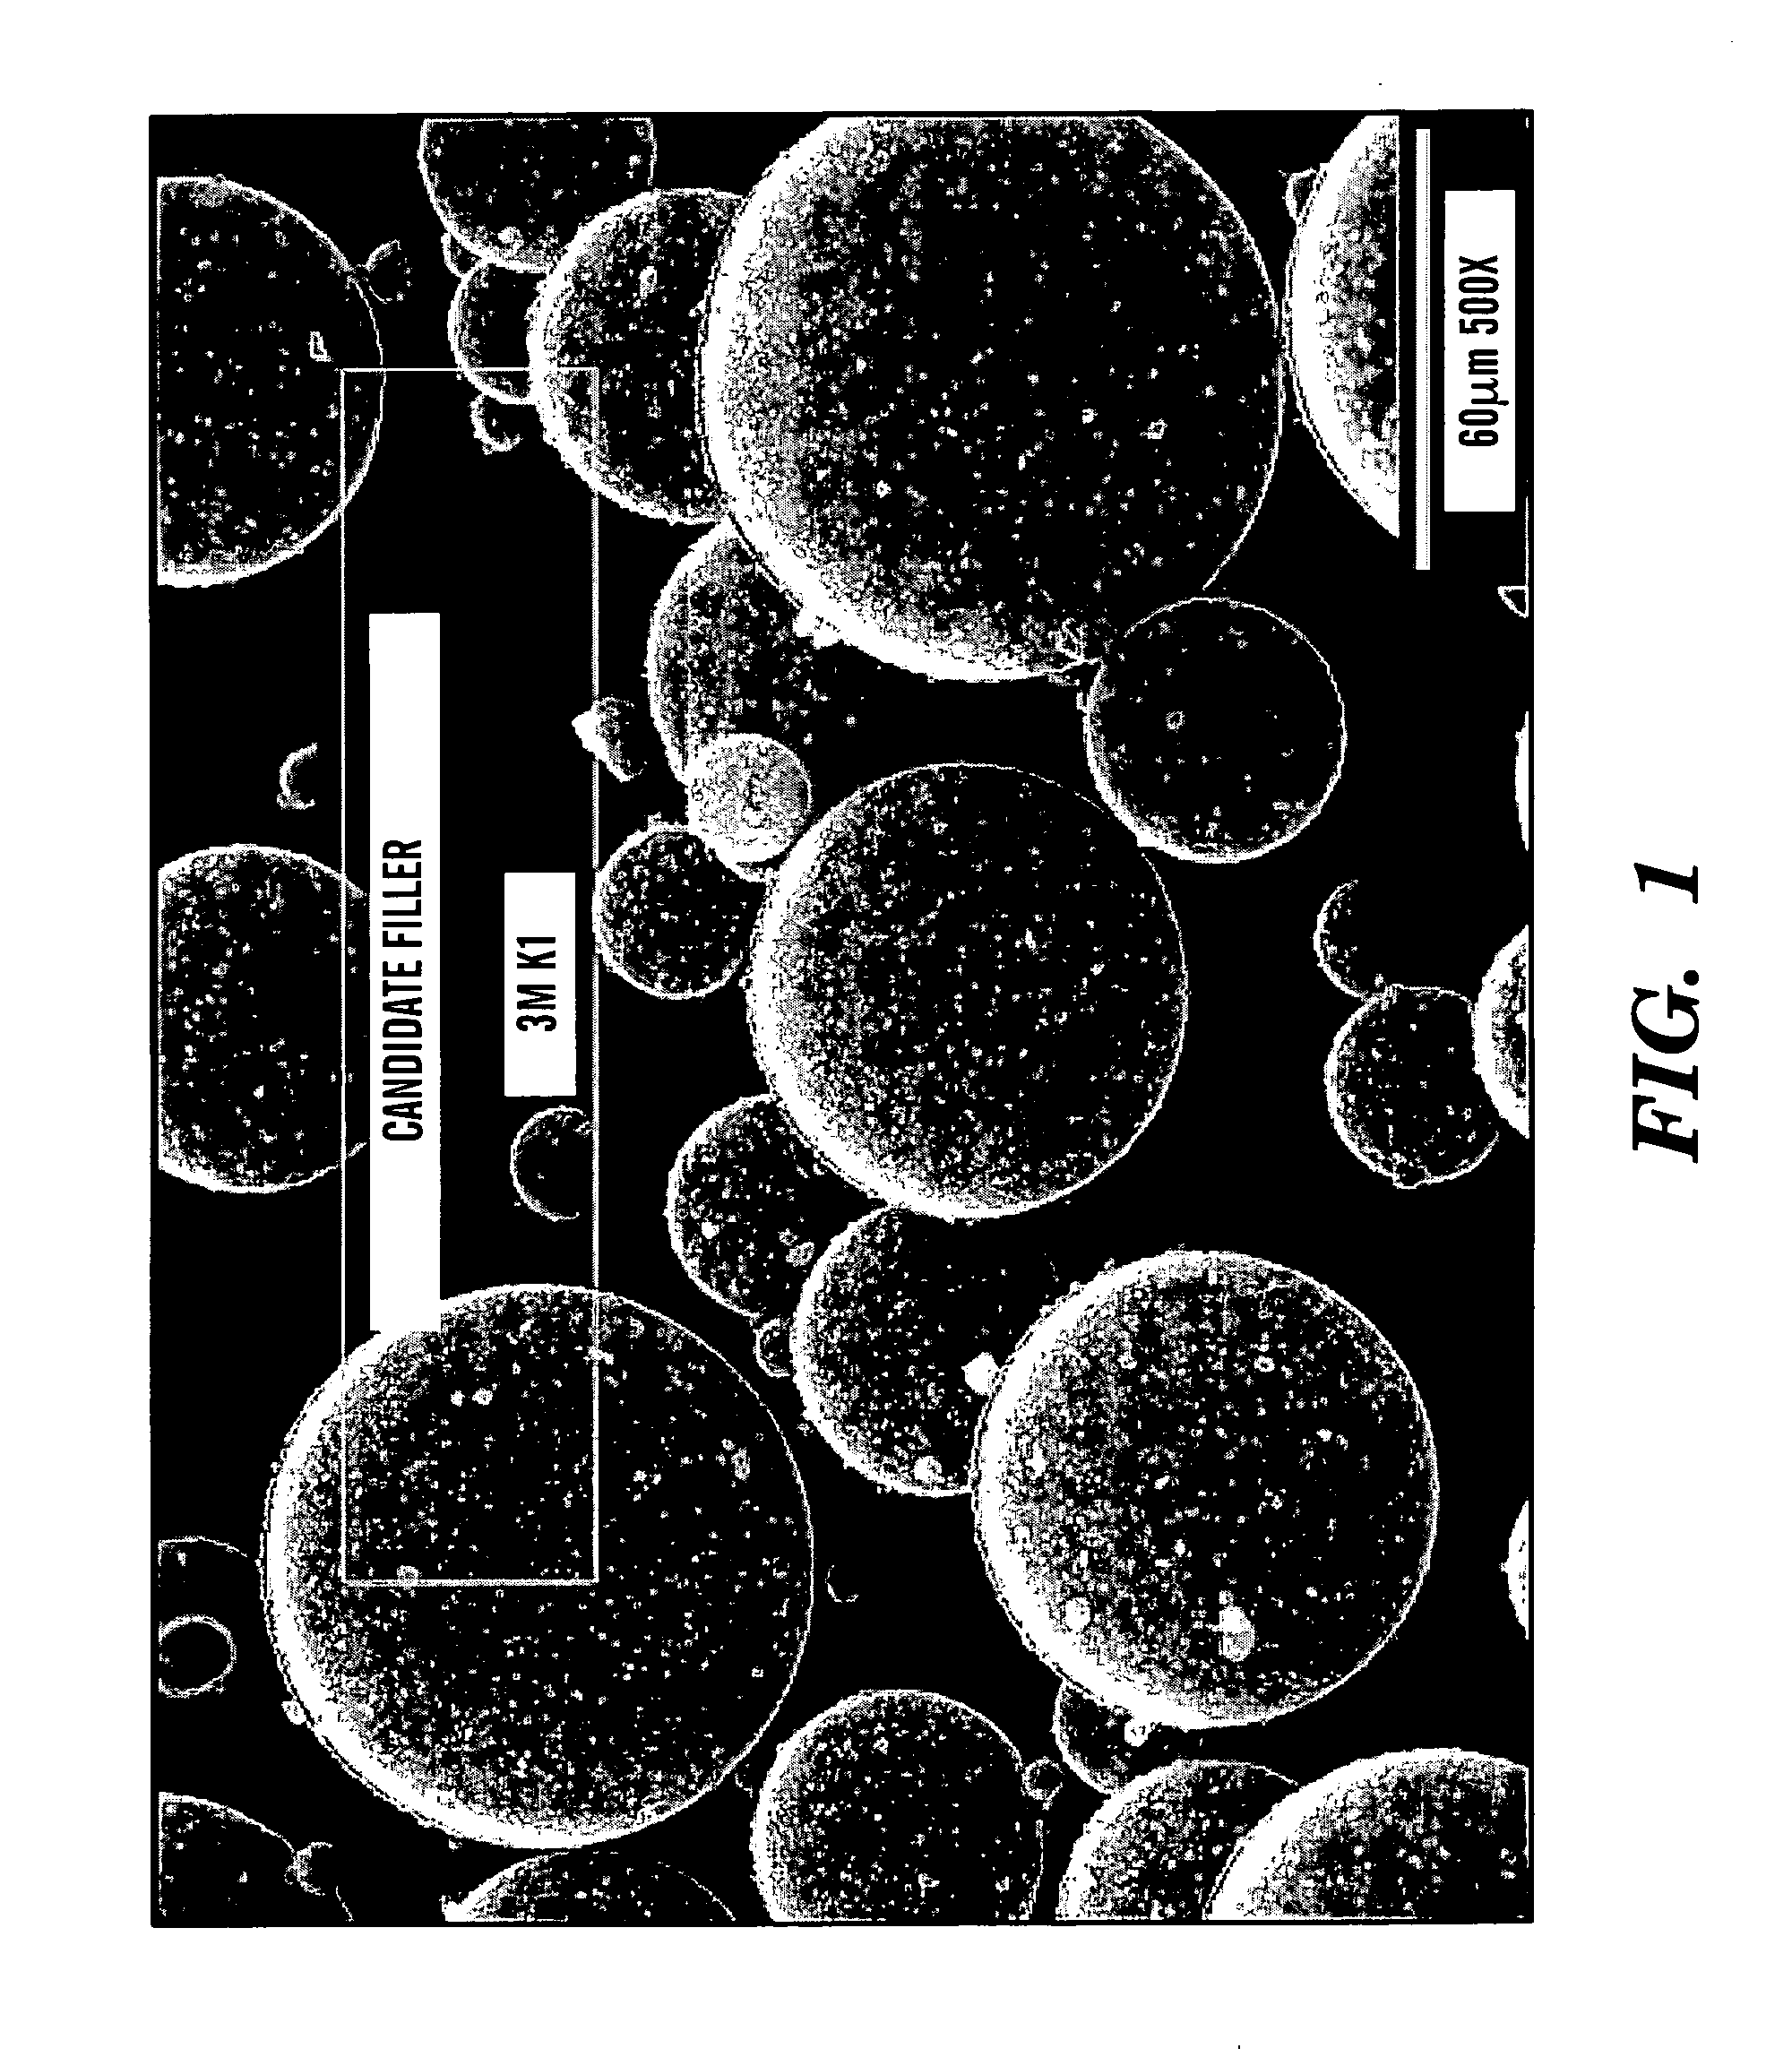 Process for enhancing material properties and materials so enhanced